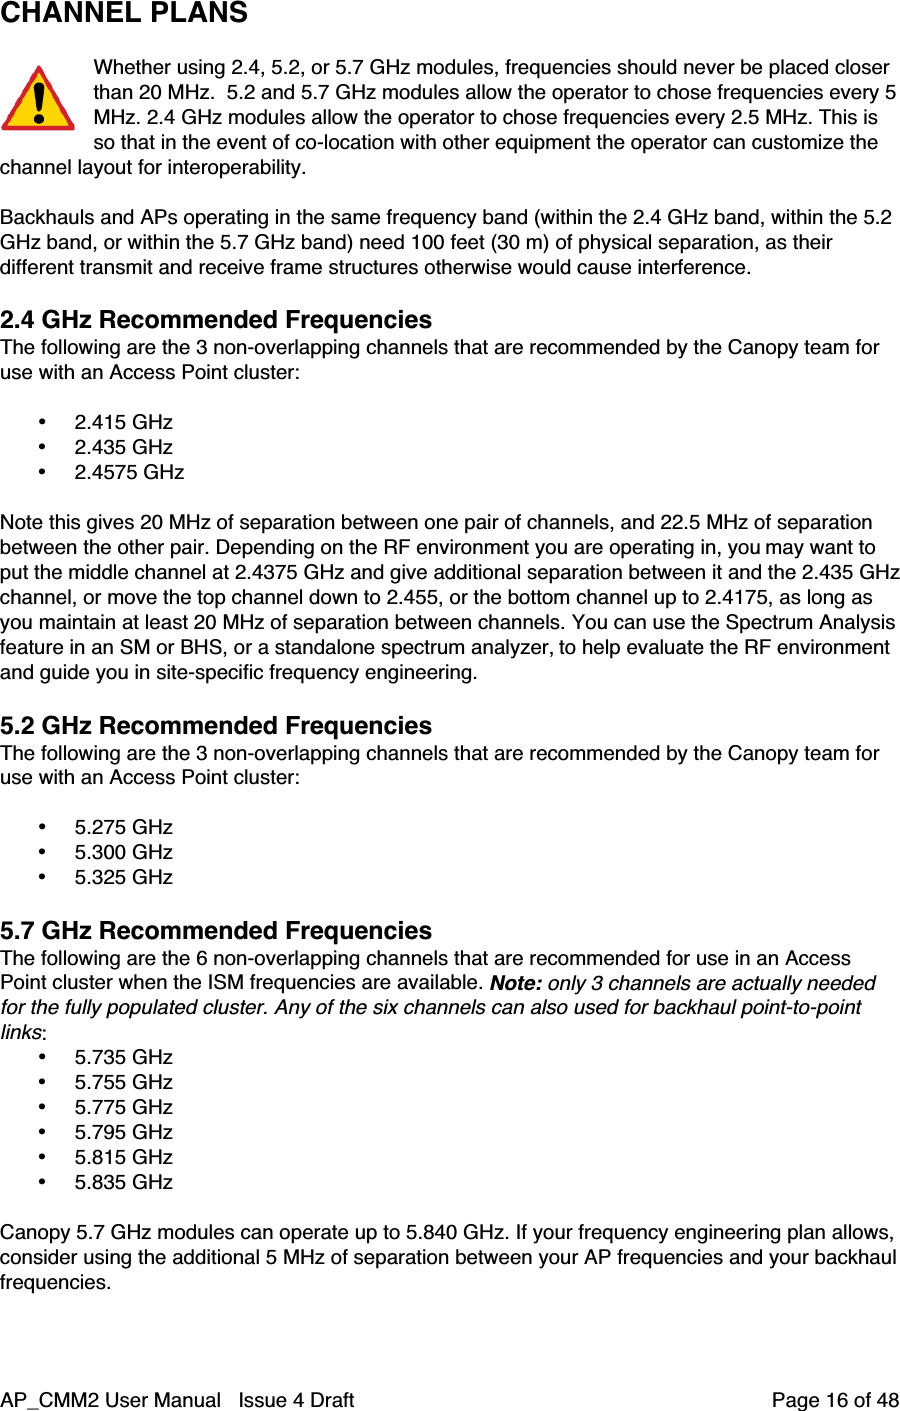 AP_CMM2 User Manual   Issue 4 Draft         Page 16 of 48CHANNEL PLANSWhether using 2.4, 5.2, or 5.7 GHz modules, frequencies should never be placed closerthan 20 MHz.  5.2 and 5.7 GHz modules allow the operator to chose frequencies every 5MHz. 2.4 GHz modules allow the operator to chose frequencies every 2.5 MHz. This isso that in the event of co-location with other equipment the operator can customize thechannel layout for interoperability.Backhauls and APs operating in the same frequency band (within the 2.4 GHz band, within the 5.2GHz band, or within the 5.7 GHz band) need 100 feet (30 m) of physical separation, as theirdifferent transmit and receive frame structures otherwise would cause interference.2.4 GHz Recommended FrequenciesThe following are the 3 non-overlapping channels that are recommended by the Canopy team foruse with an Access Point cluster:• 2.415 GHz• 2.435 GHz• 2.4575 GHzNote this gives 20 MHz of separation between one pair of channels, and 22.5 MHz of separationbetween the other pair. Depending on the RF environment you are operating in, you may want toput the middle channel at 2.4375 GHz and give additional separation between it and the 2.435 GHzchannel, or move the top channel down to 2.455, or the bottom channel up to 2.4175, as long asyou maintain at least 20 MHz of separation between channels. You can use the Spectrum Analysisfeature in an SM or BHS, or a standalone spectrum analyzer, to help evaluate the RF environmentand guide you in site-specific frequency engineering.5.2 GHz Recommended FrequenciesThe following are the 3 non-overlapping channels that are recommended by the Canopy team foruse with an Access Point cluster:• 5.275 GHz• 5.300 GHz• 5.325 GHz5.7 GHz Recommended FrequenciesThe following are the 6 non-overlapping channels that are recommended for use in an AccessPoint cluster when the ISM frequencies are available. Note: only 3 channels are actually neededfor the fully populated cluster. Any of the six channels can also used for backhaul point-to-pointlinks:• 5.735 GHz• 5.755 GHz• 5.775 GHz• 5.795 GHz• 5.815 GHz• 5.835 GHzCanopy 5.7 GHz modules can operate up to 5.840 GHz. If your frequency engineering plan allows,consider using the additional 5 MHz of separation between your AP frequencies and your backhaulfrequencies.